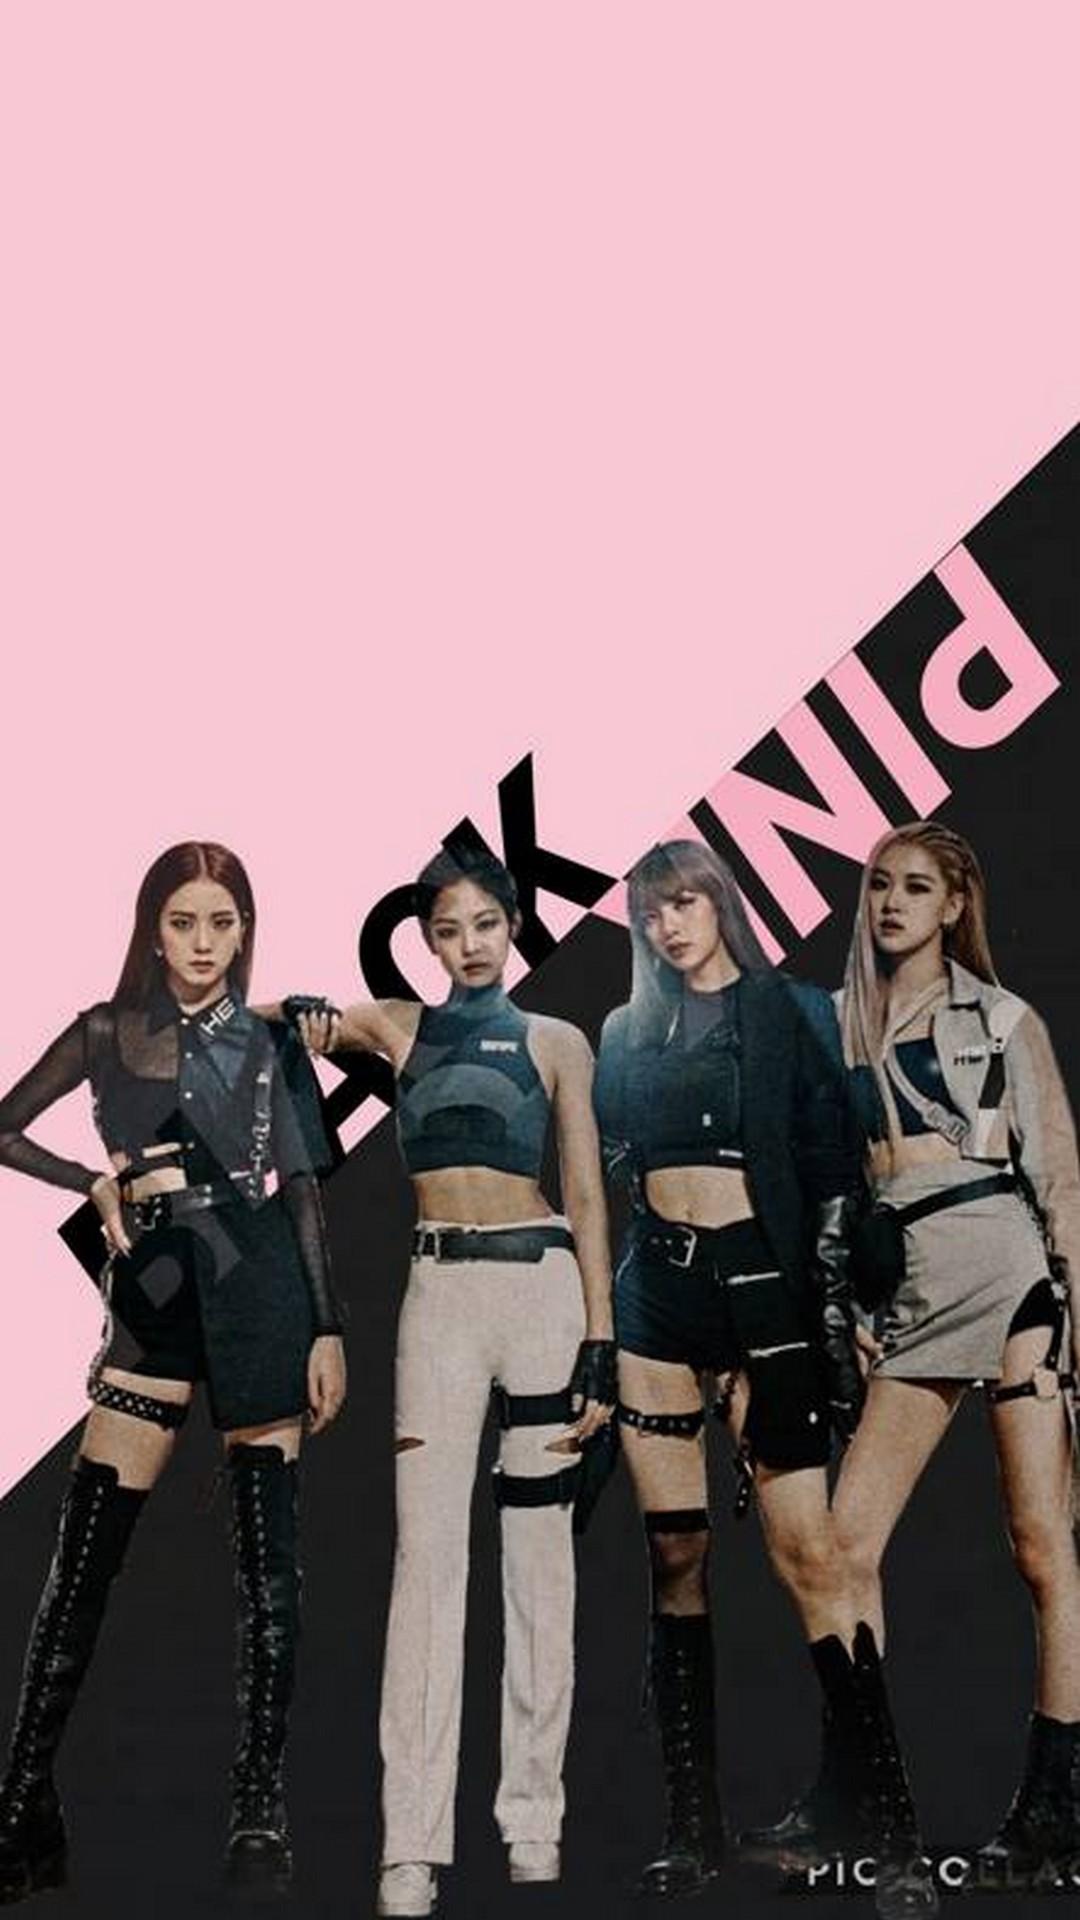 Blackpink For Android Wallpapers - Wallpaper Cave